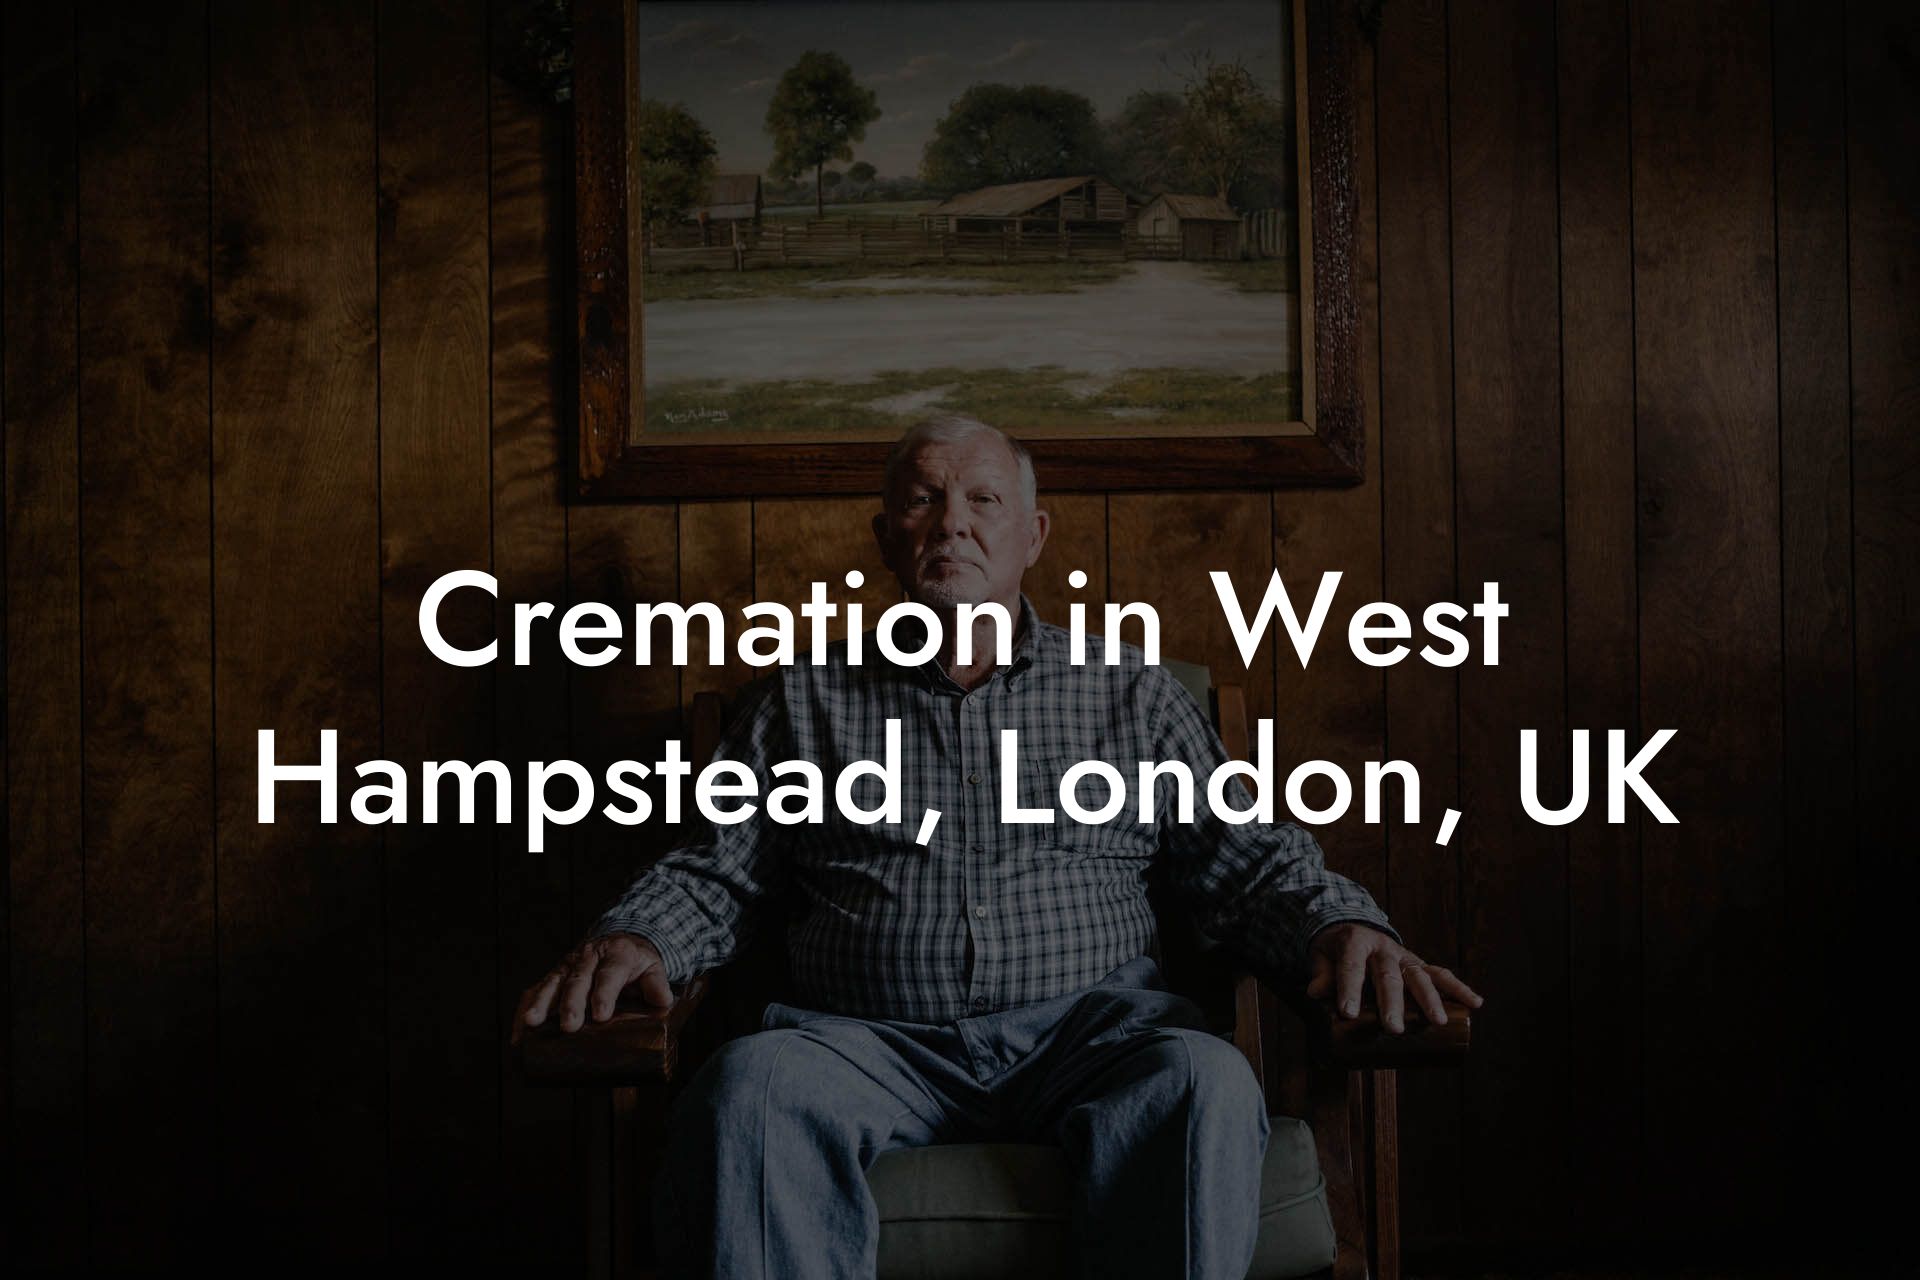 Cremation in West Hampstead, London, UK